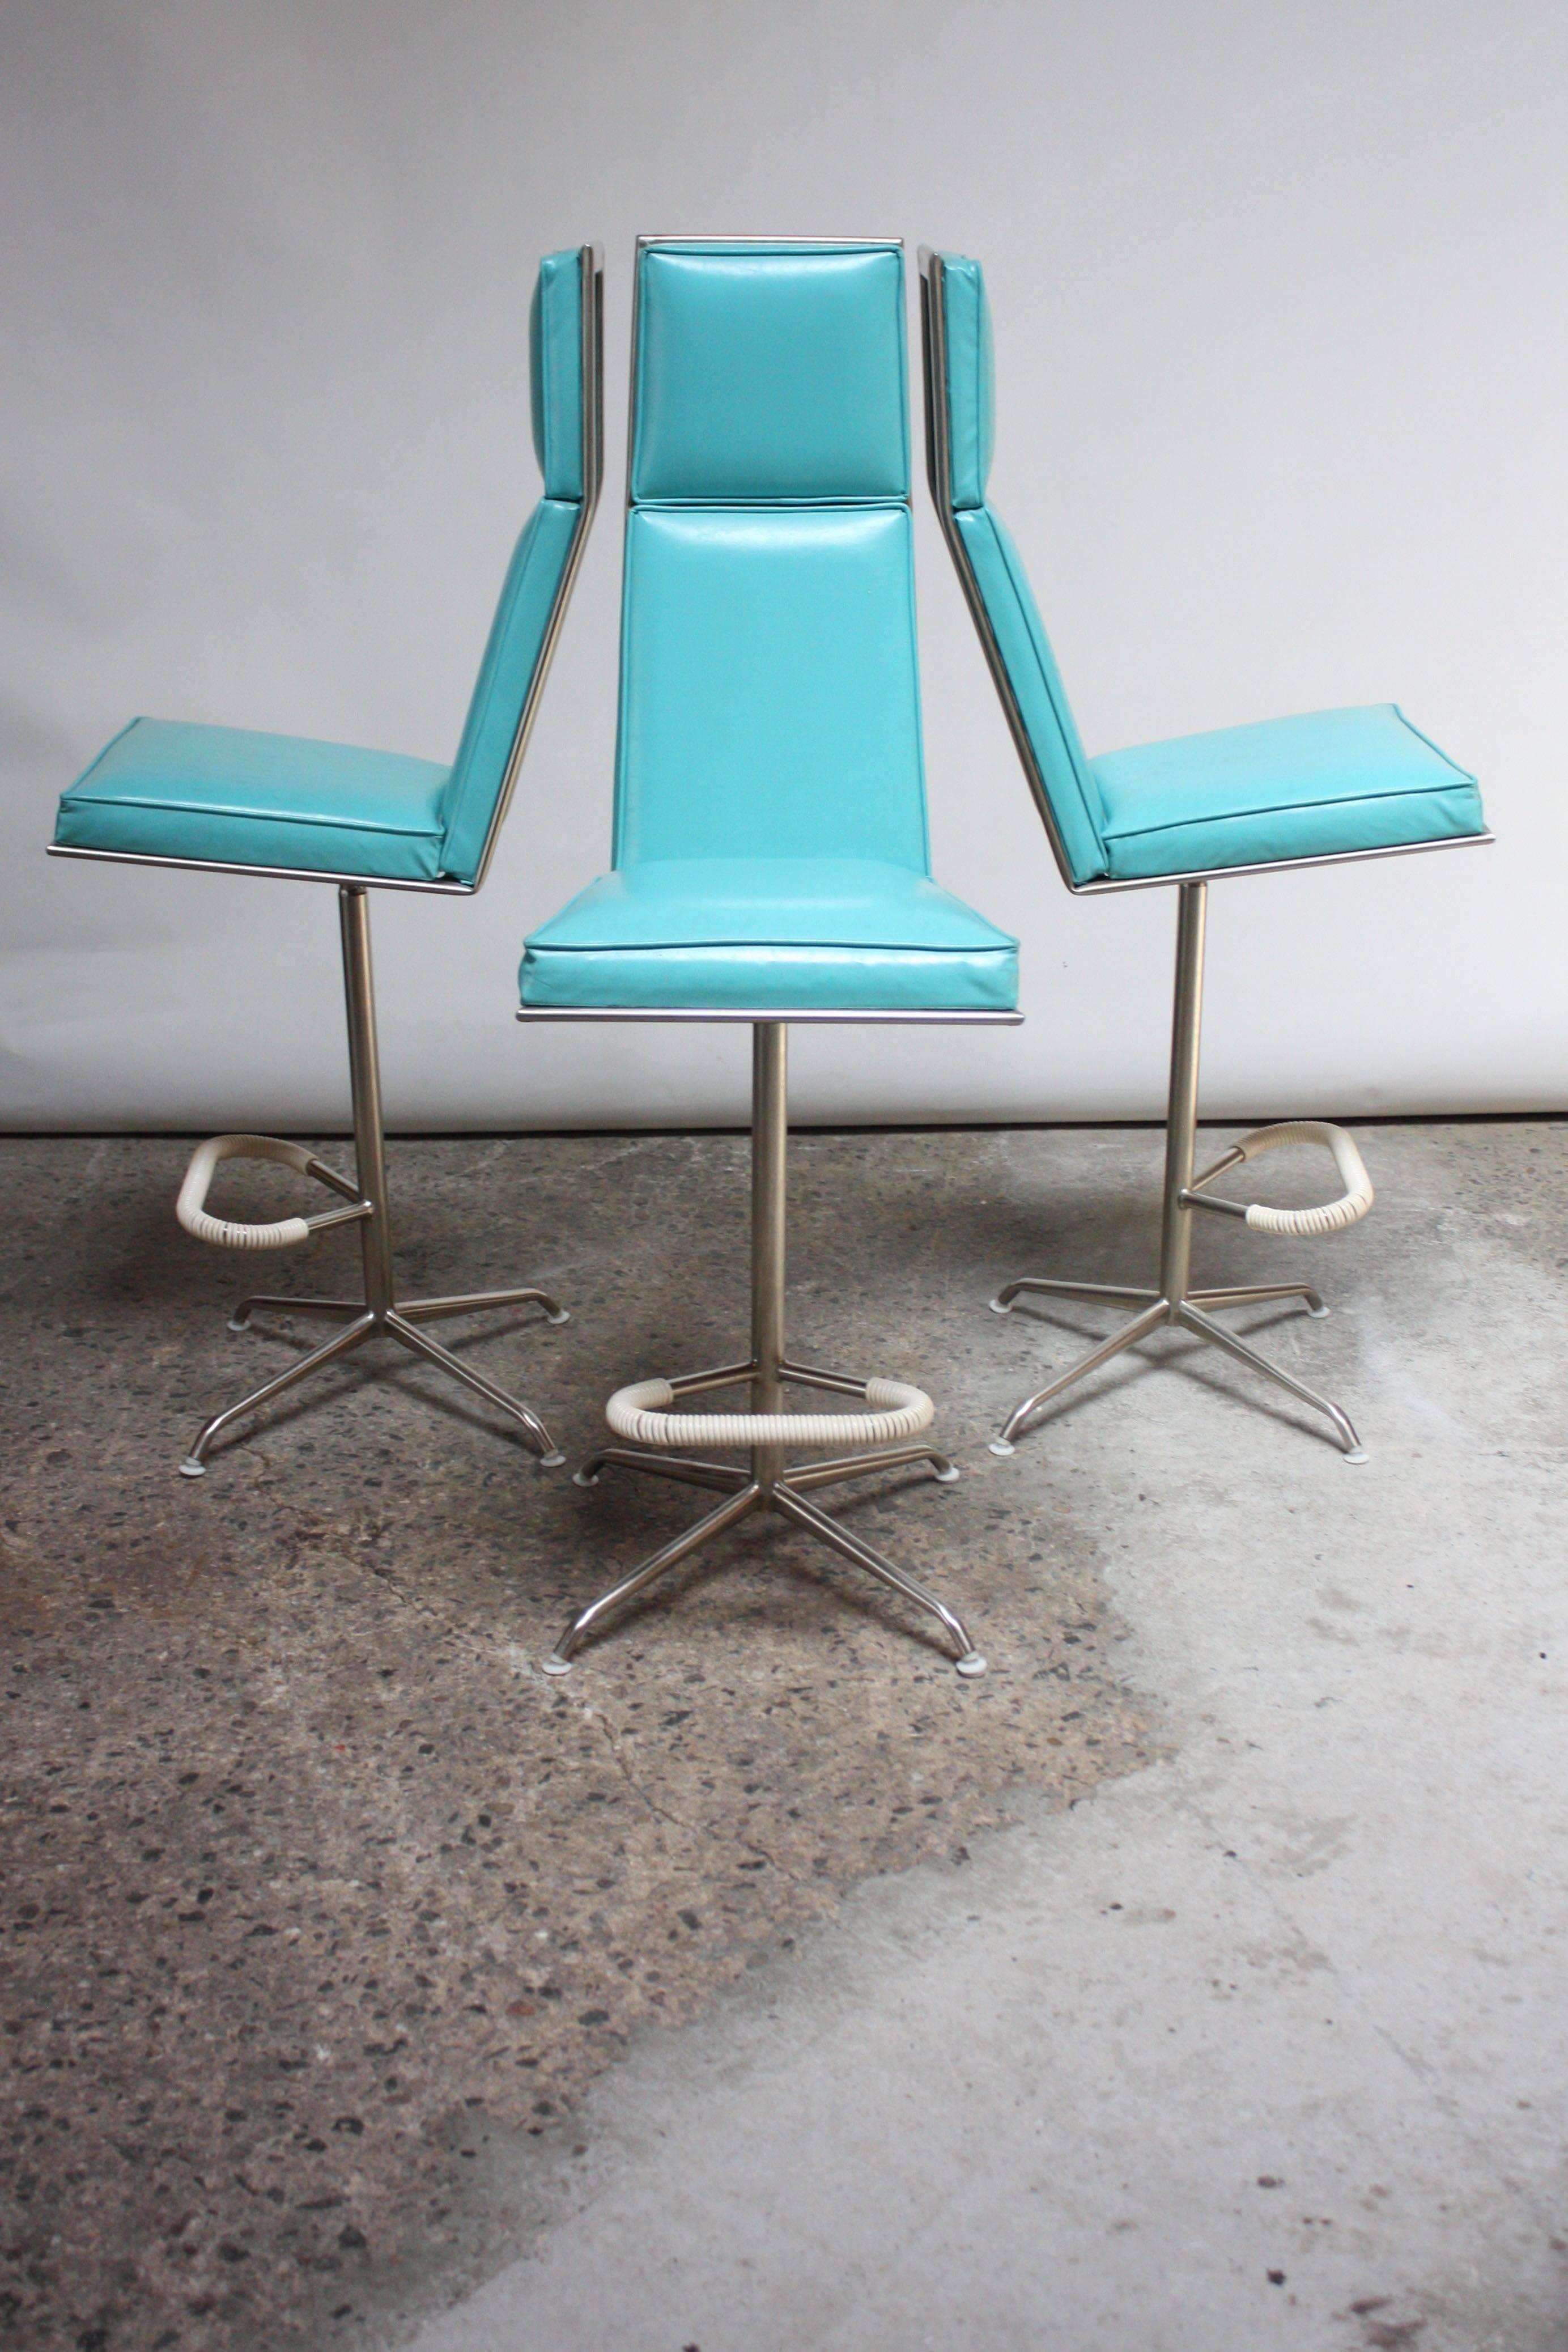 Set of Three American Modern High-Back Barstools by Jansko In Good Condition For Sale In Brooklyn, NY